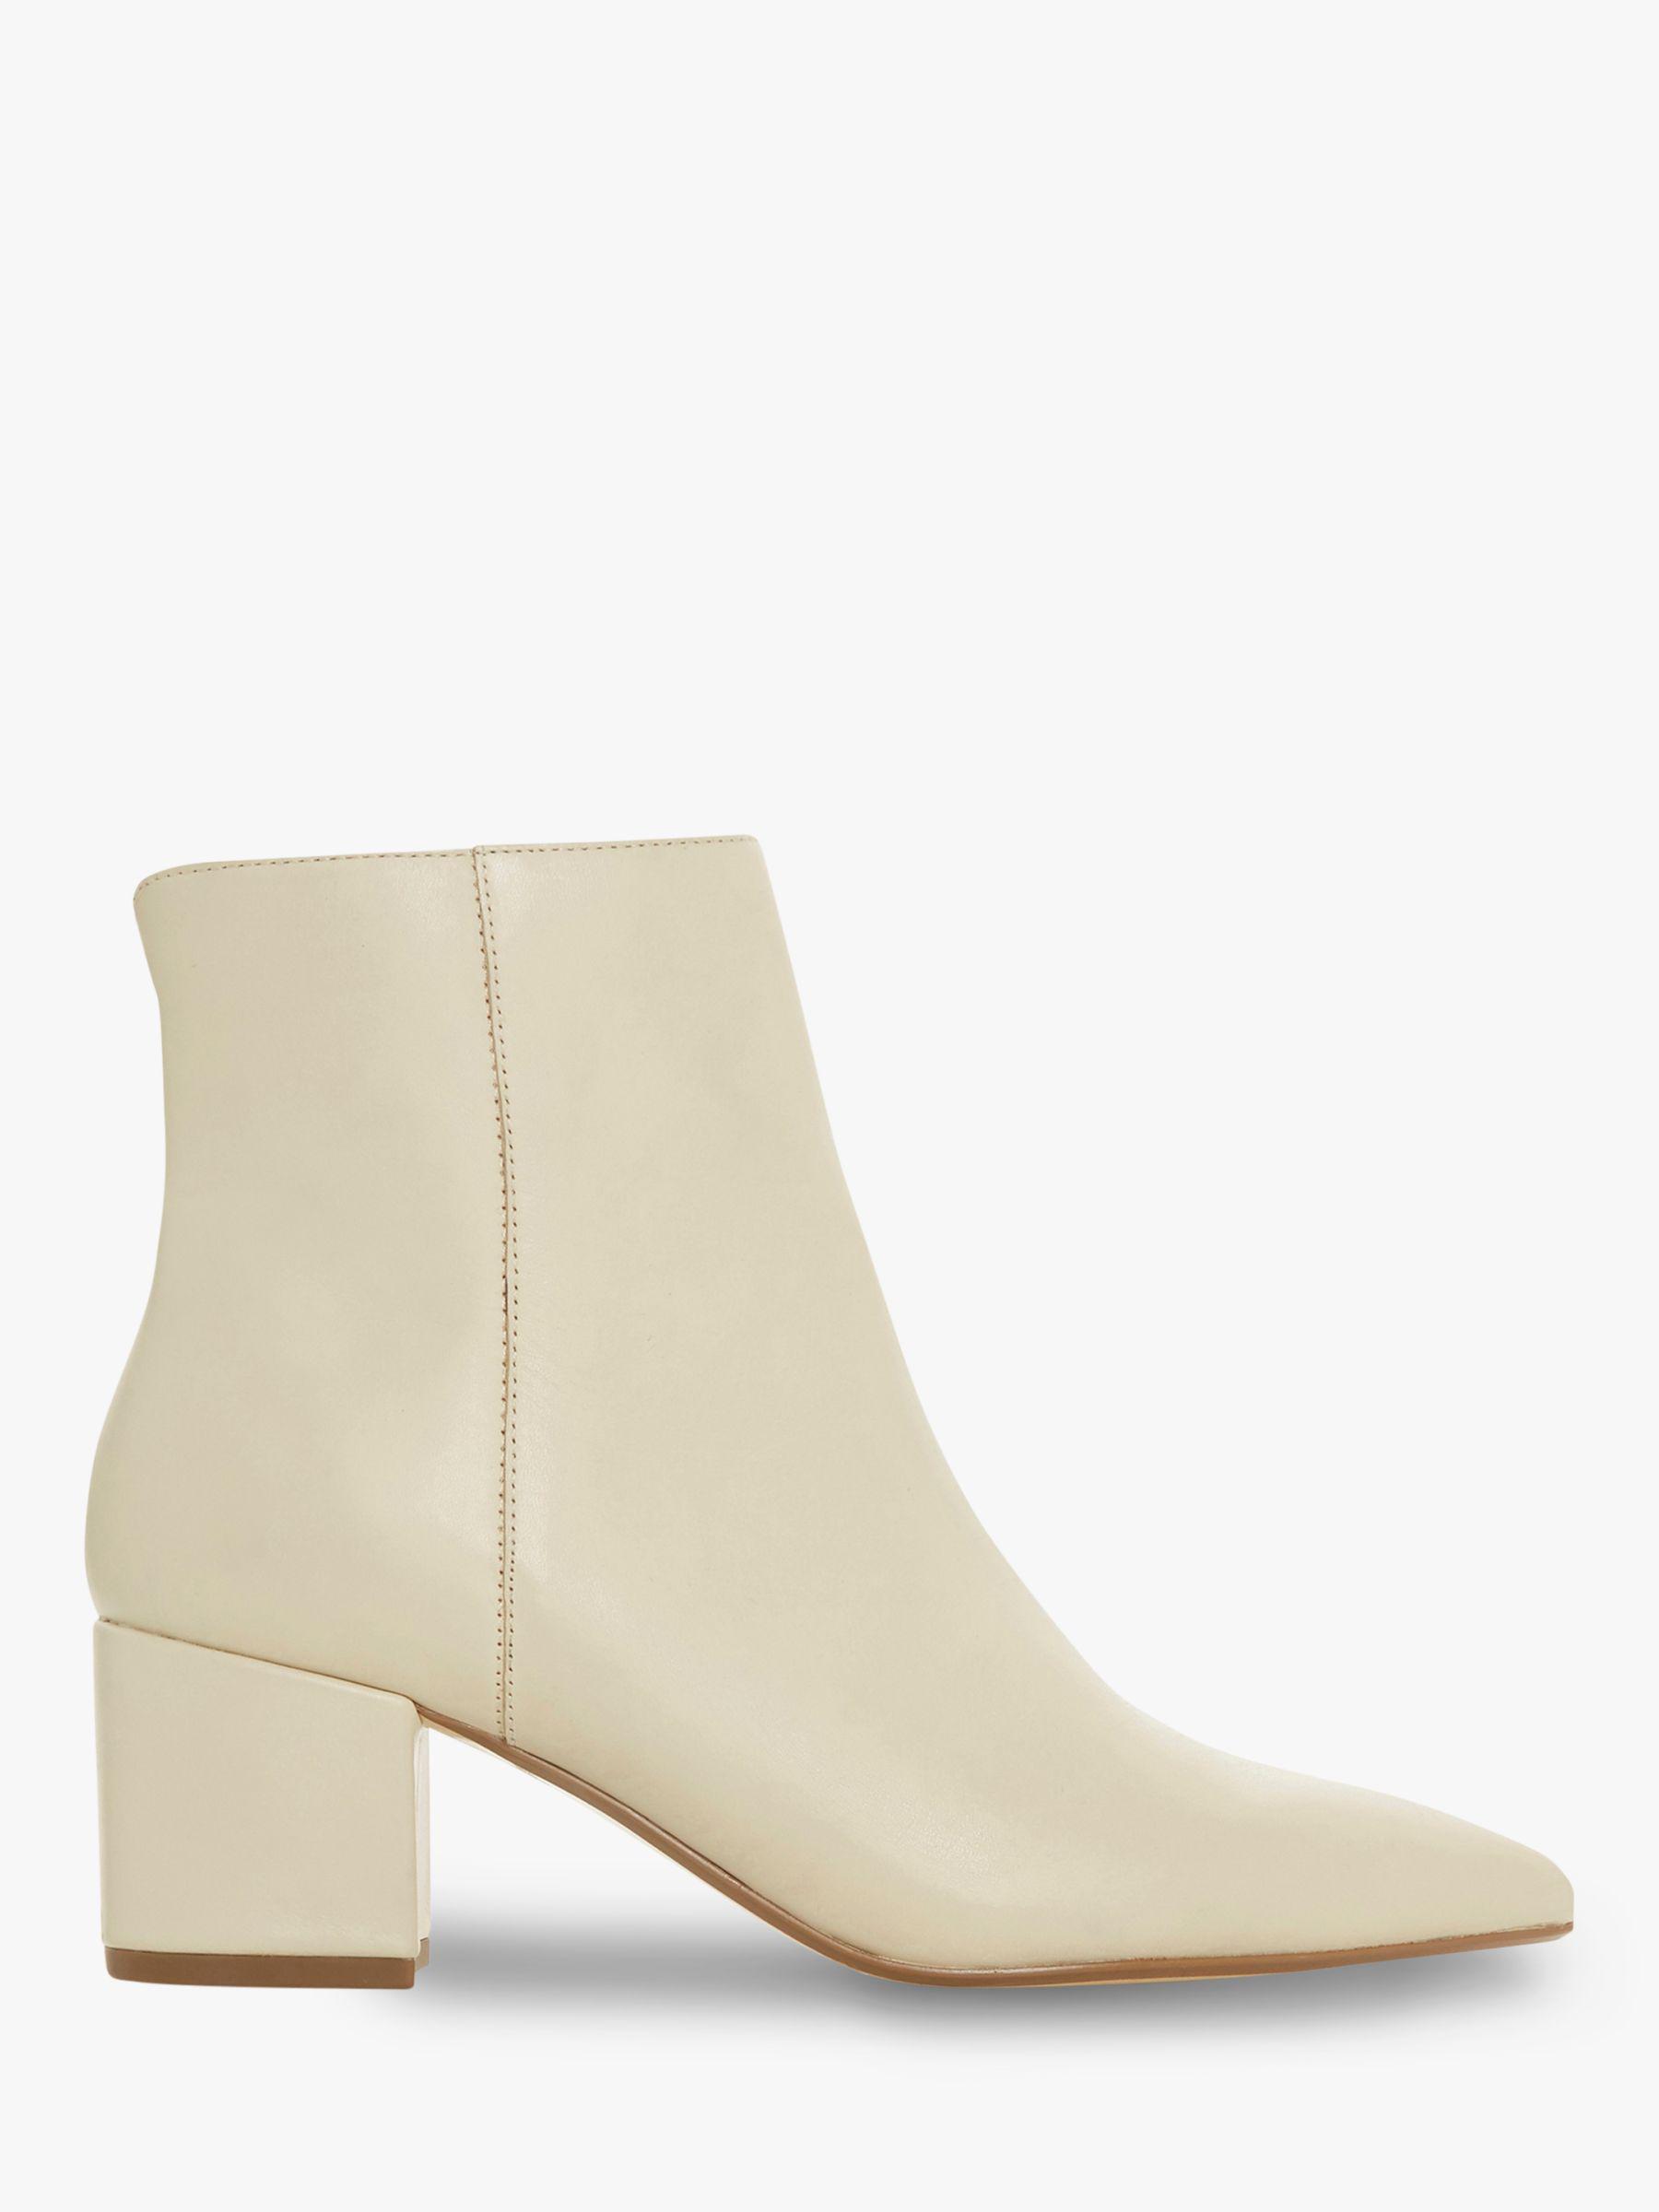 Dune Omarii Block Heel Ankle Boots in Natural | Lyst UK